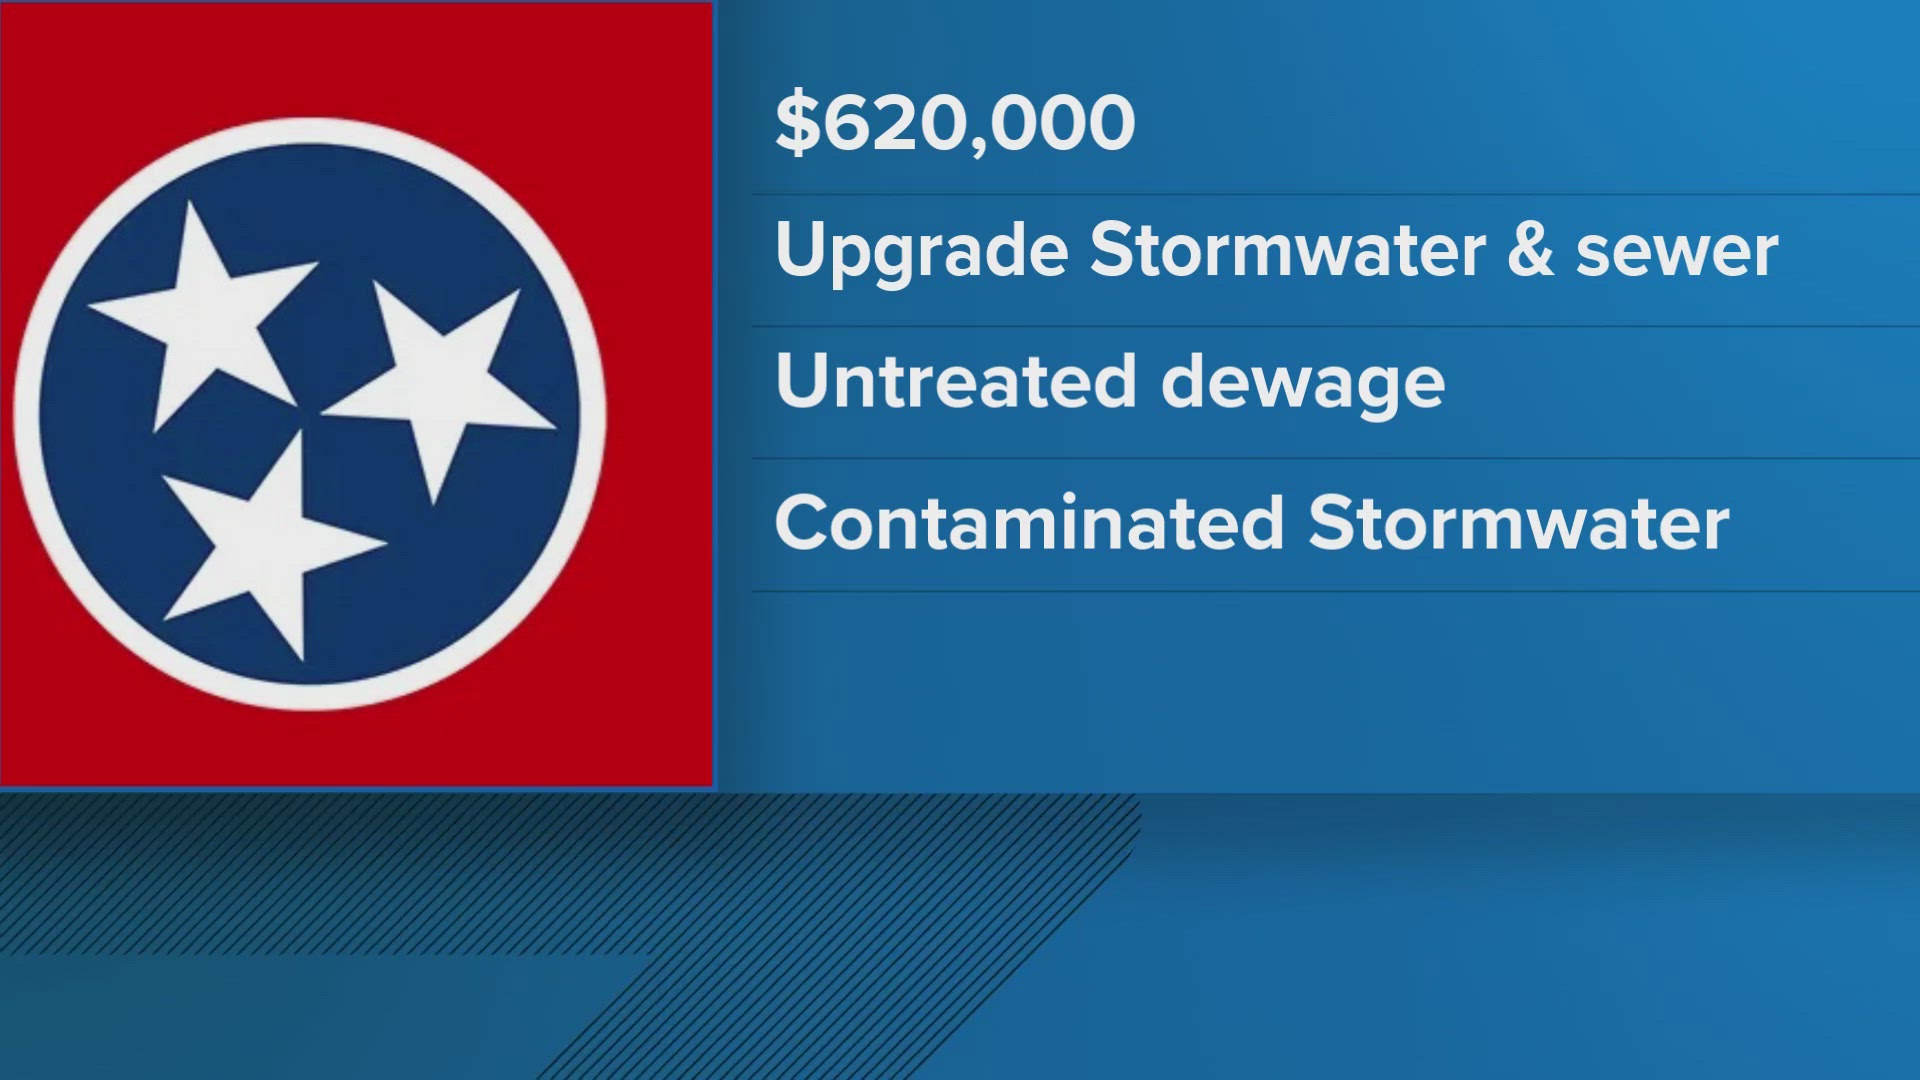 The money will be used to upgrade stormwater and sewer infrastructure across Tennessee.